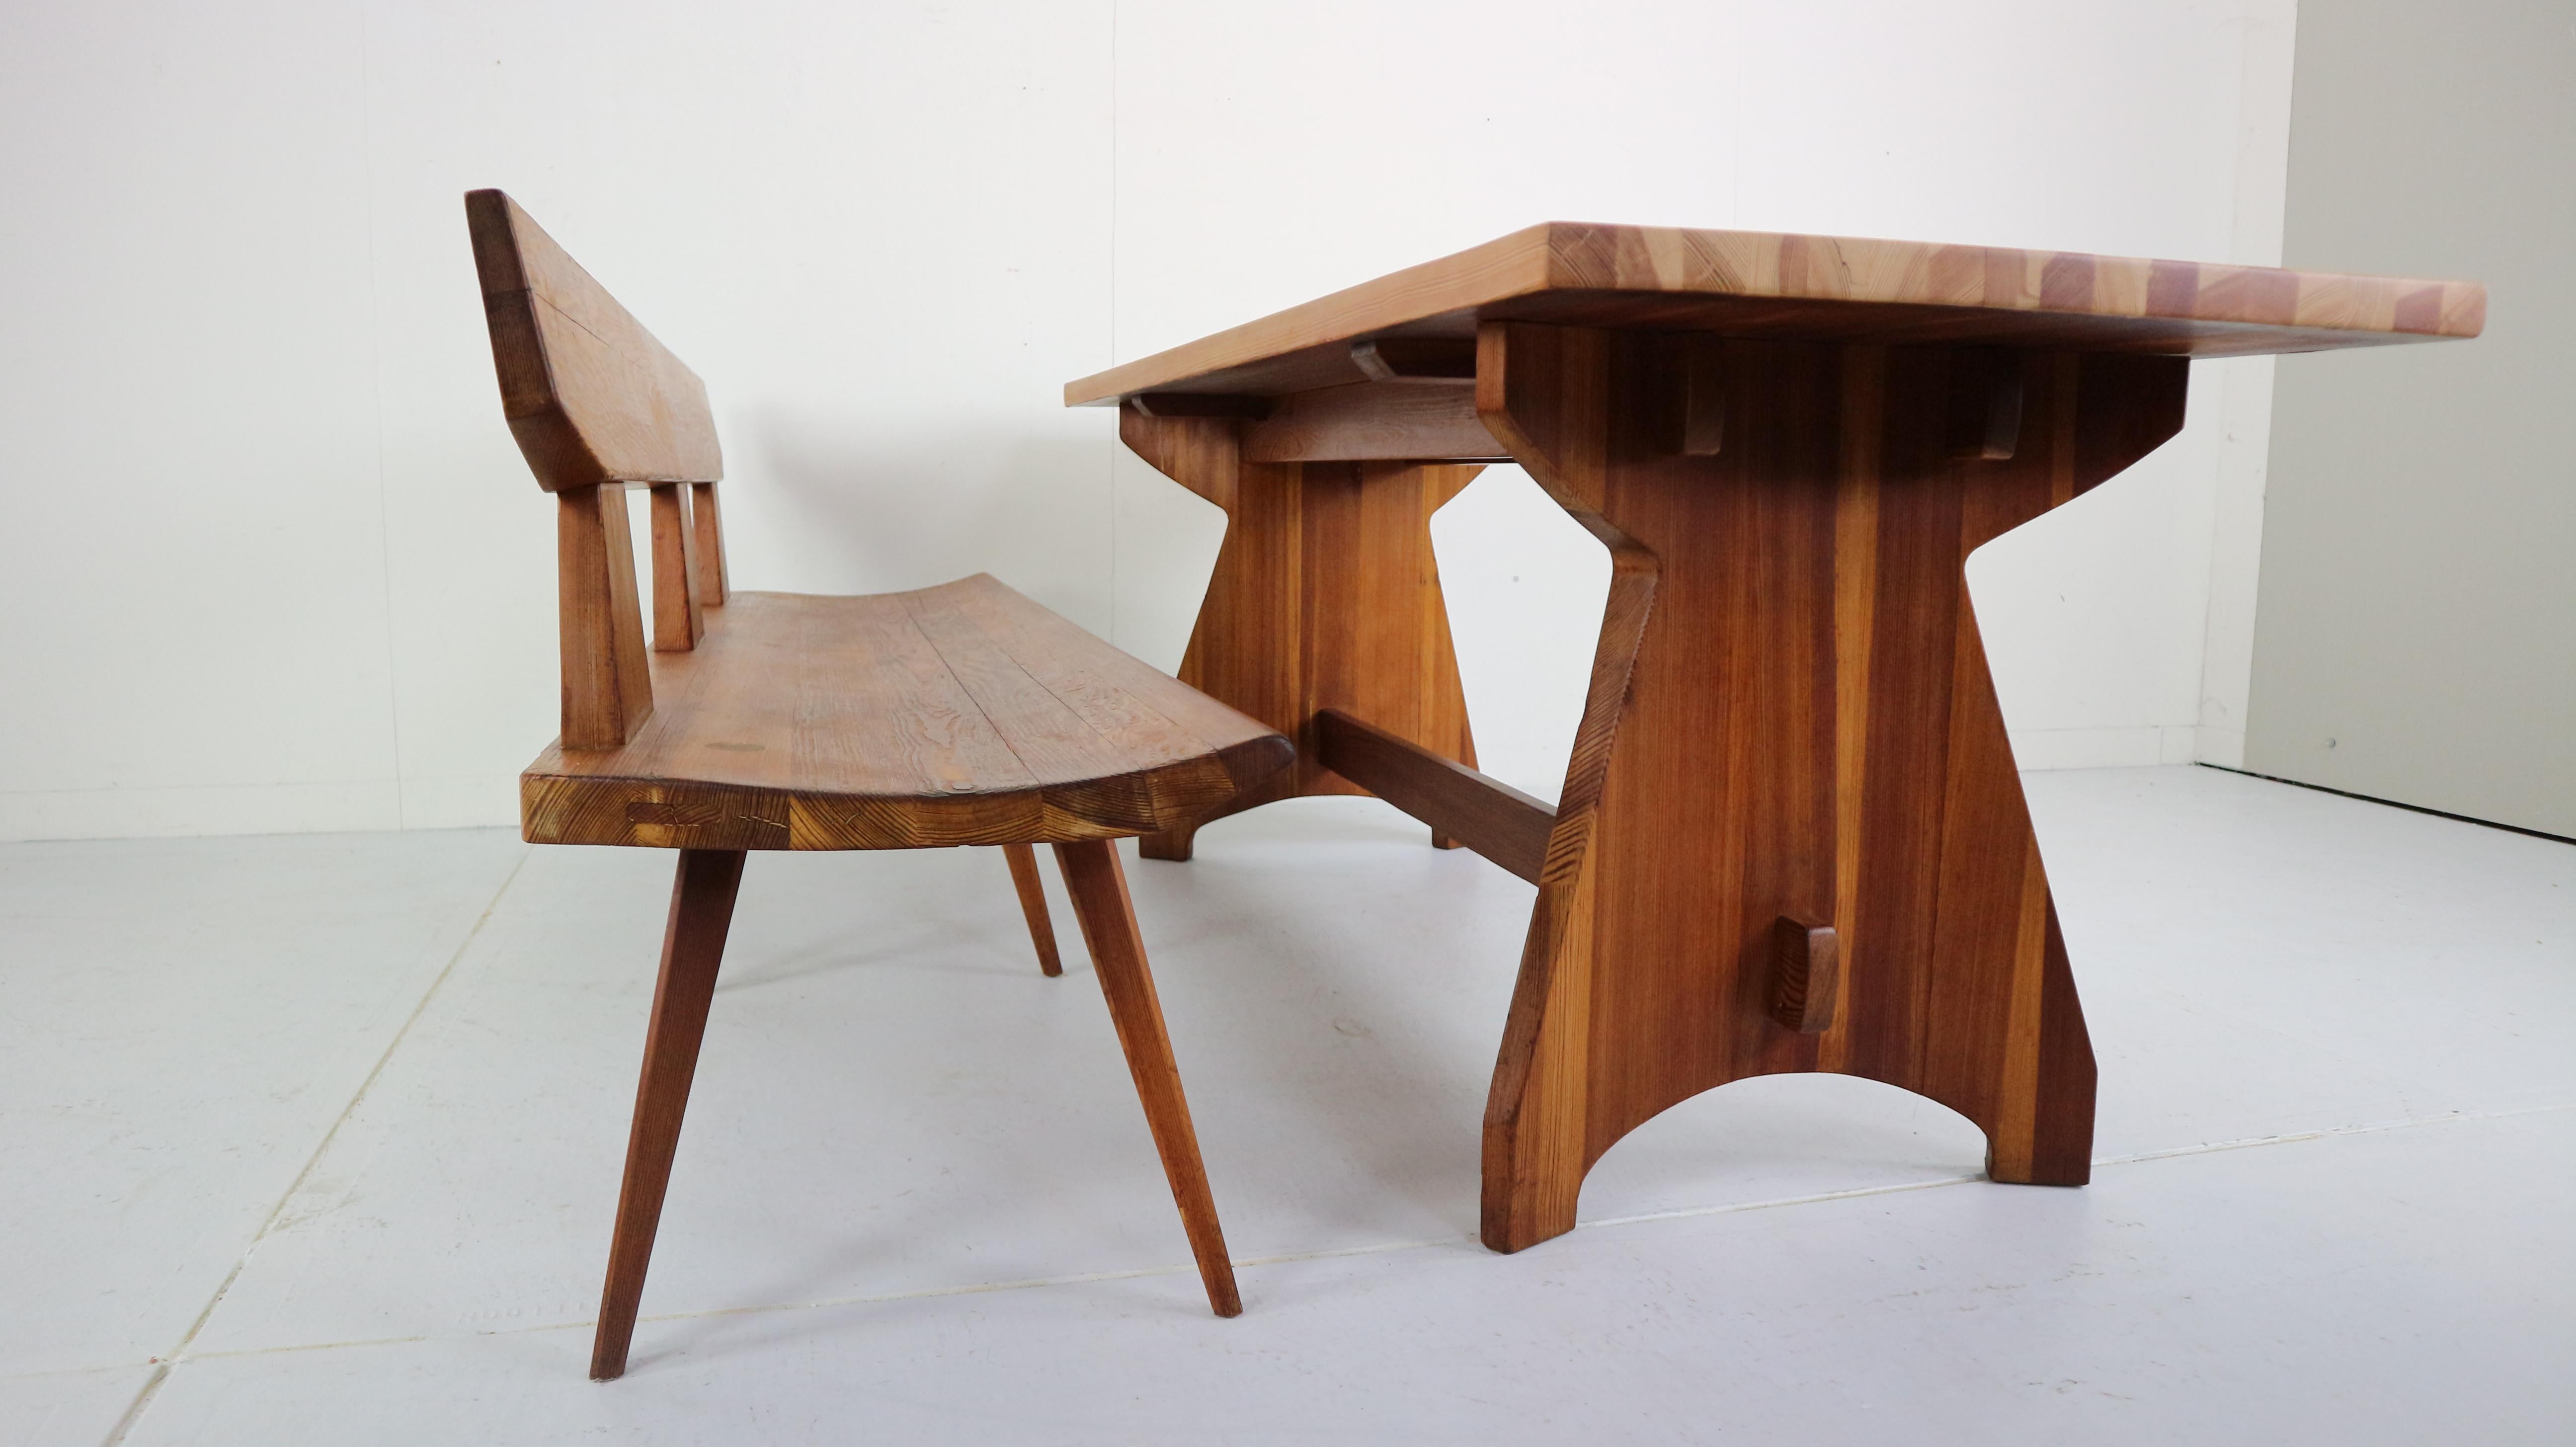 Hand-Crafted Jacob Kielland Brandt Bench and table handcrafted for Christiansen, 1960s